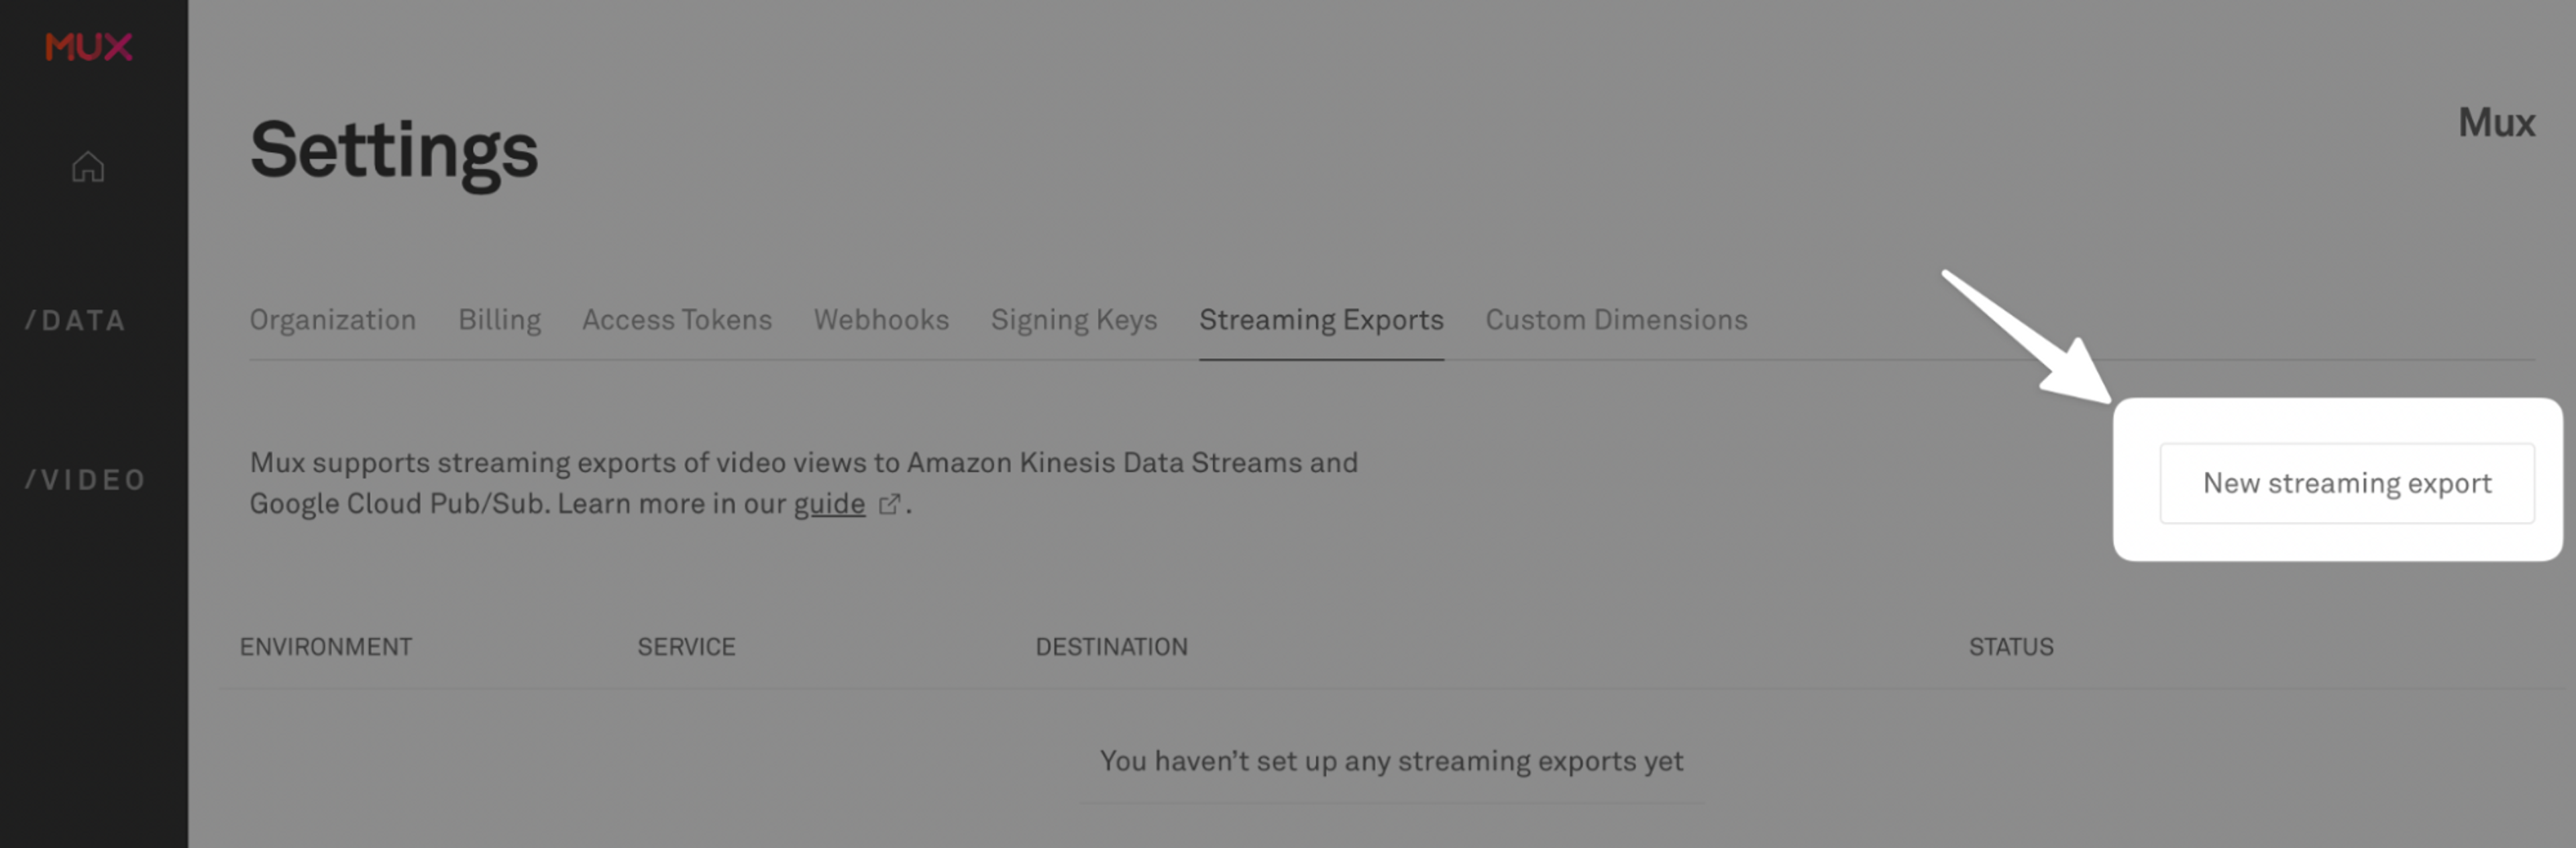 A screenshot of the Mux admin dashboard with the New streaming export button highlight